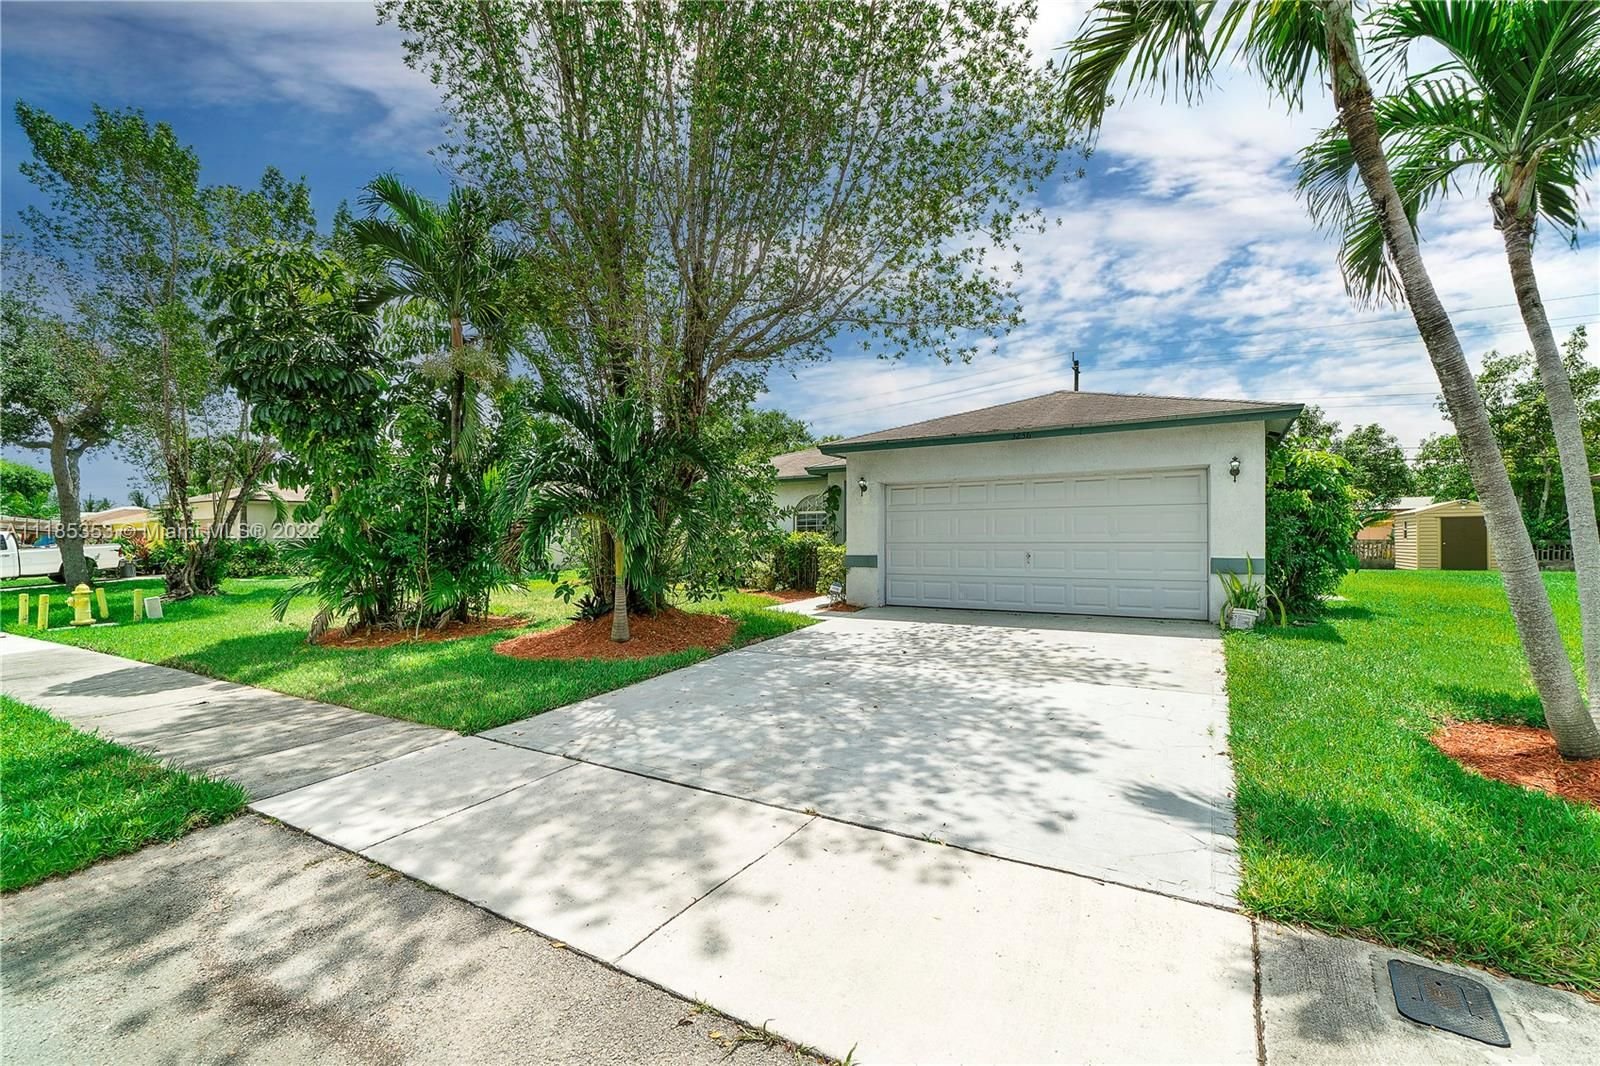 Real estate property located at 3236 43rd Pl, Broward County, Oakland Park, FL